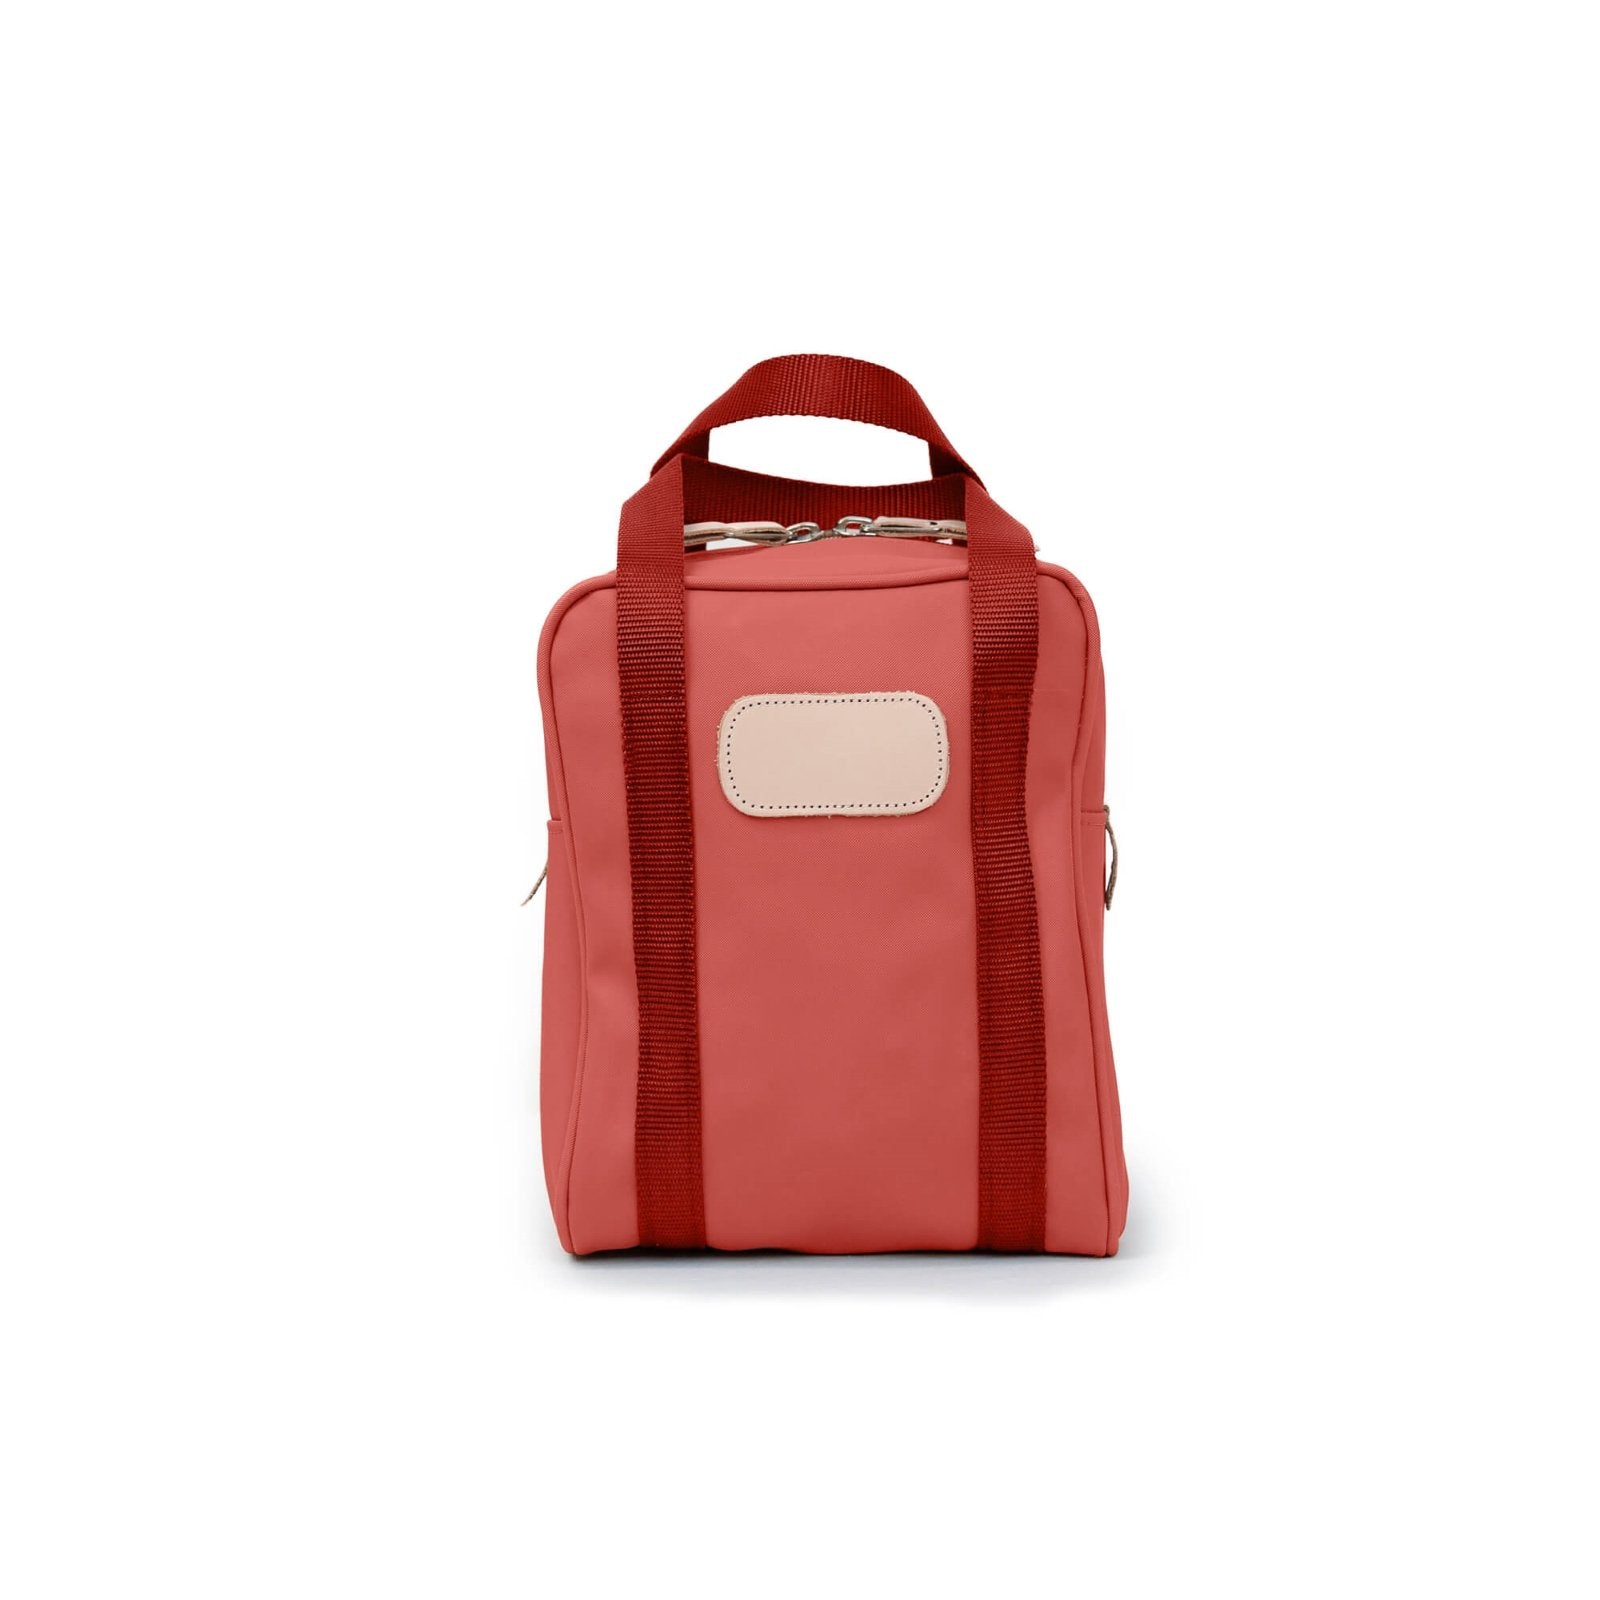 Shag Bag (Order in any color!) Shag Bags Jon Hart Coral Coated Canvas  